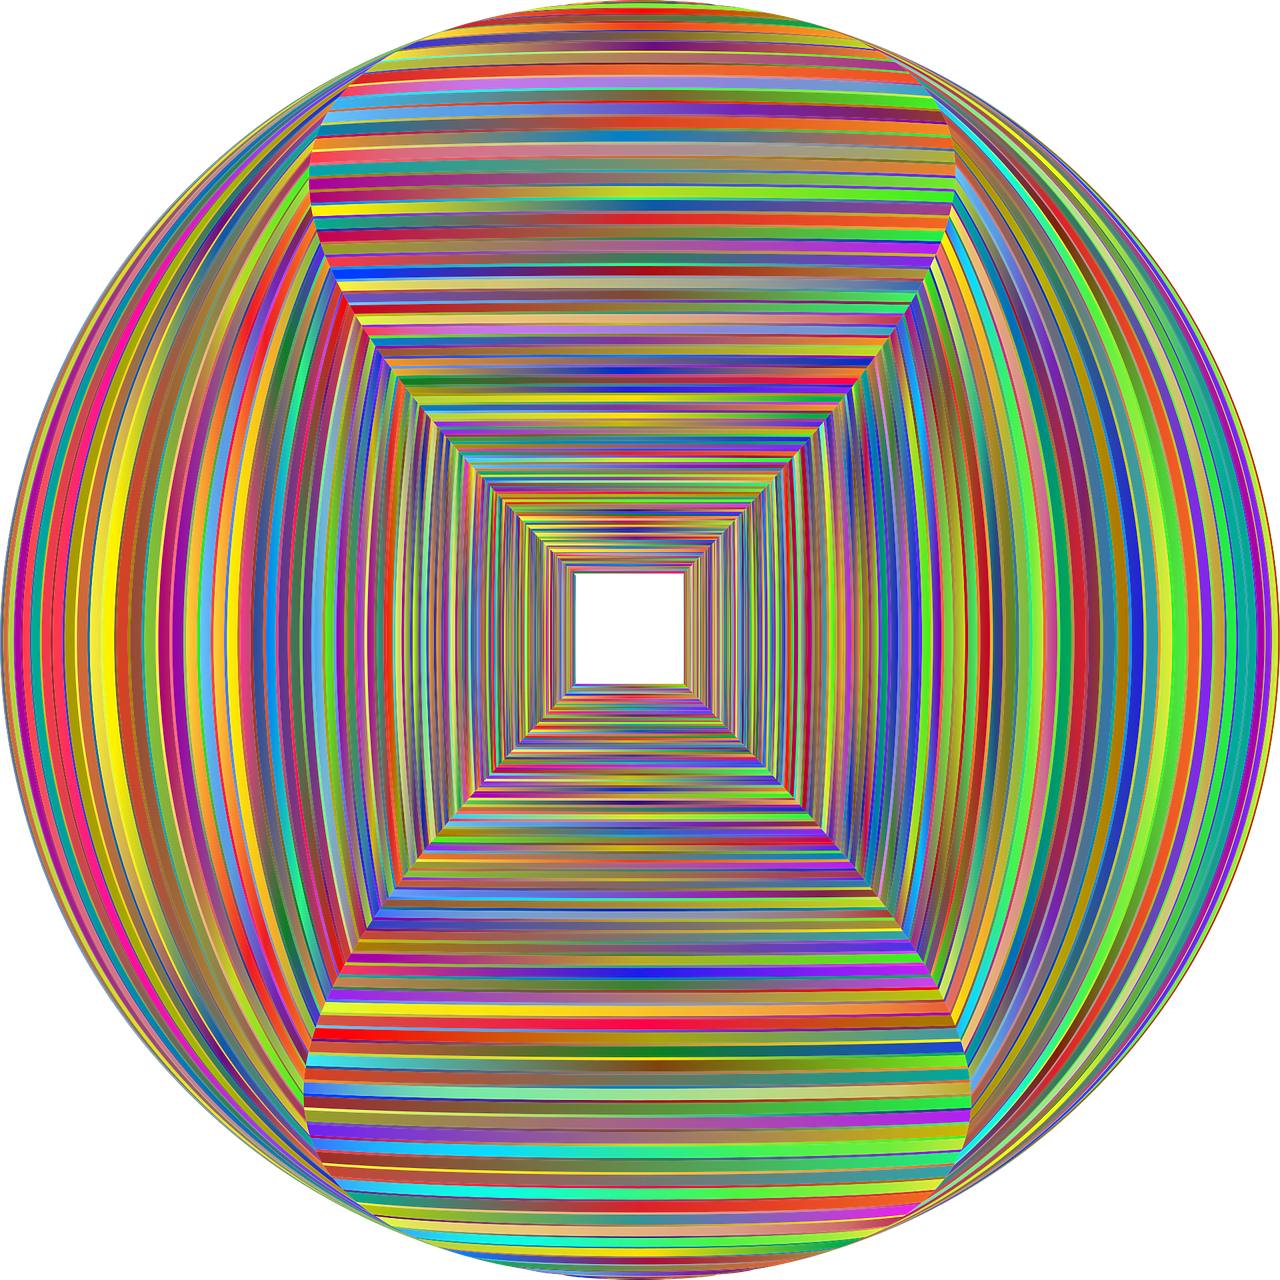 the colorful squares are arranged in a large circular